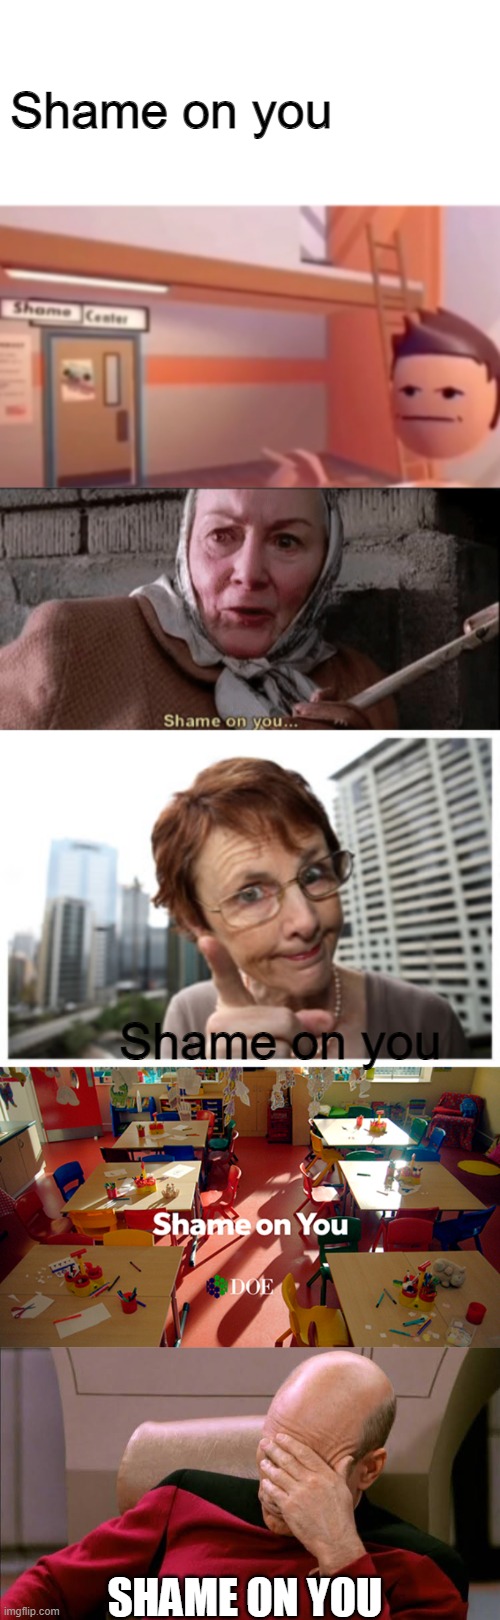 Shame on you | Shame on you; Shame on you; SHAME ON YOU | image tagged in shame on you text,aunt may shame on you,shame on you | made w/ Imgflip meme maker